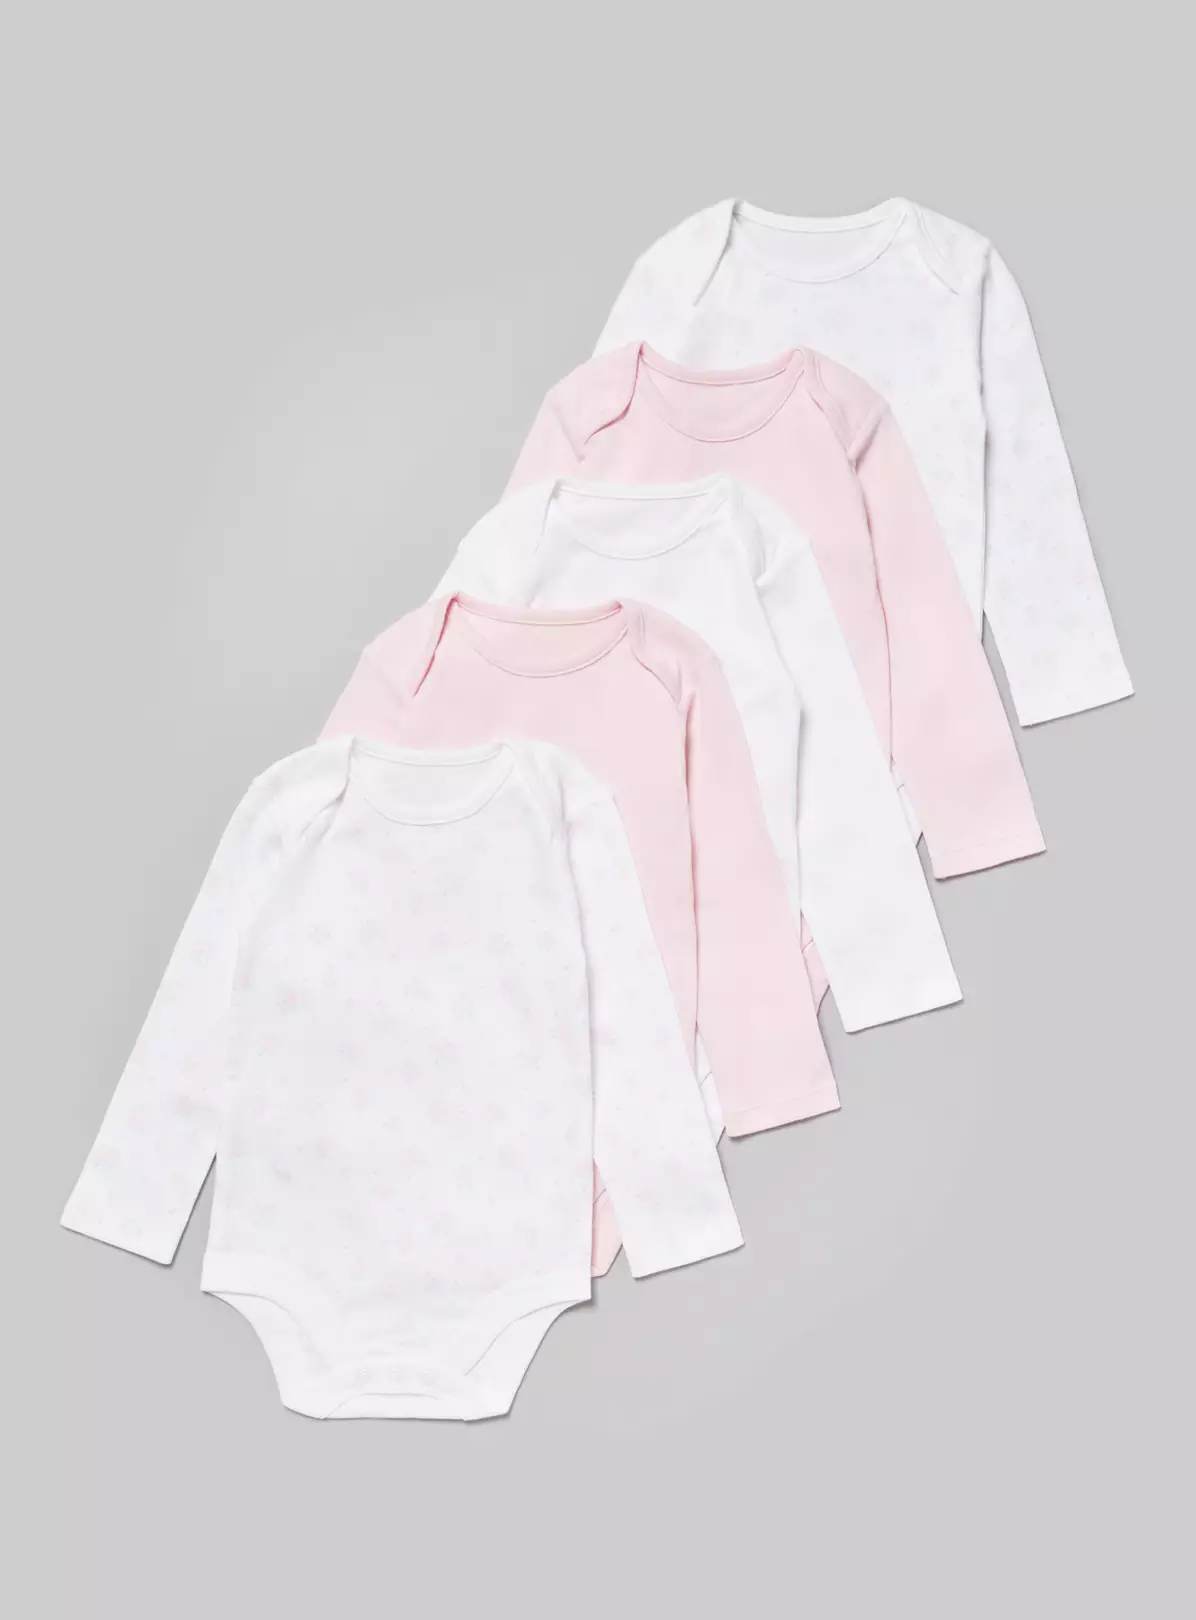 Pink Long Sleeve Bodysuit 5 Pack – 6-9 months